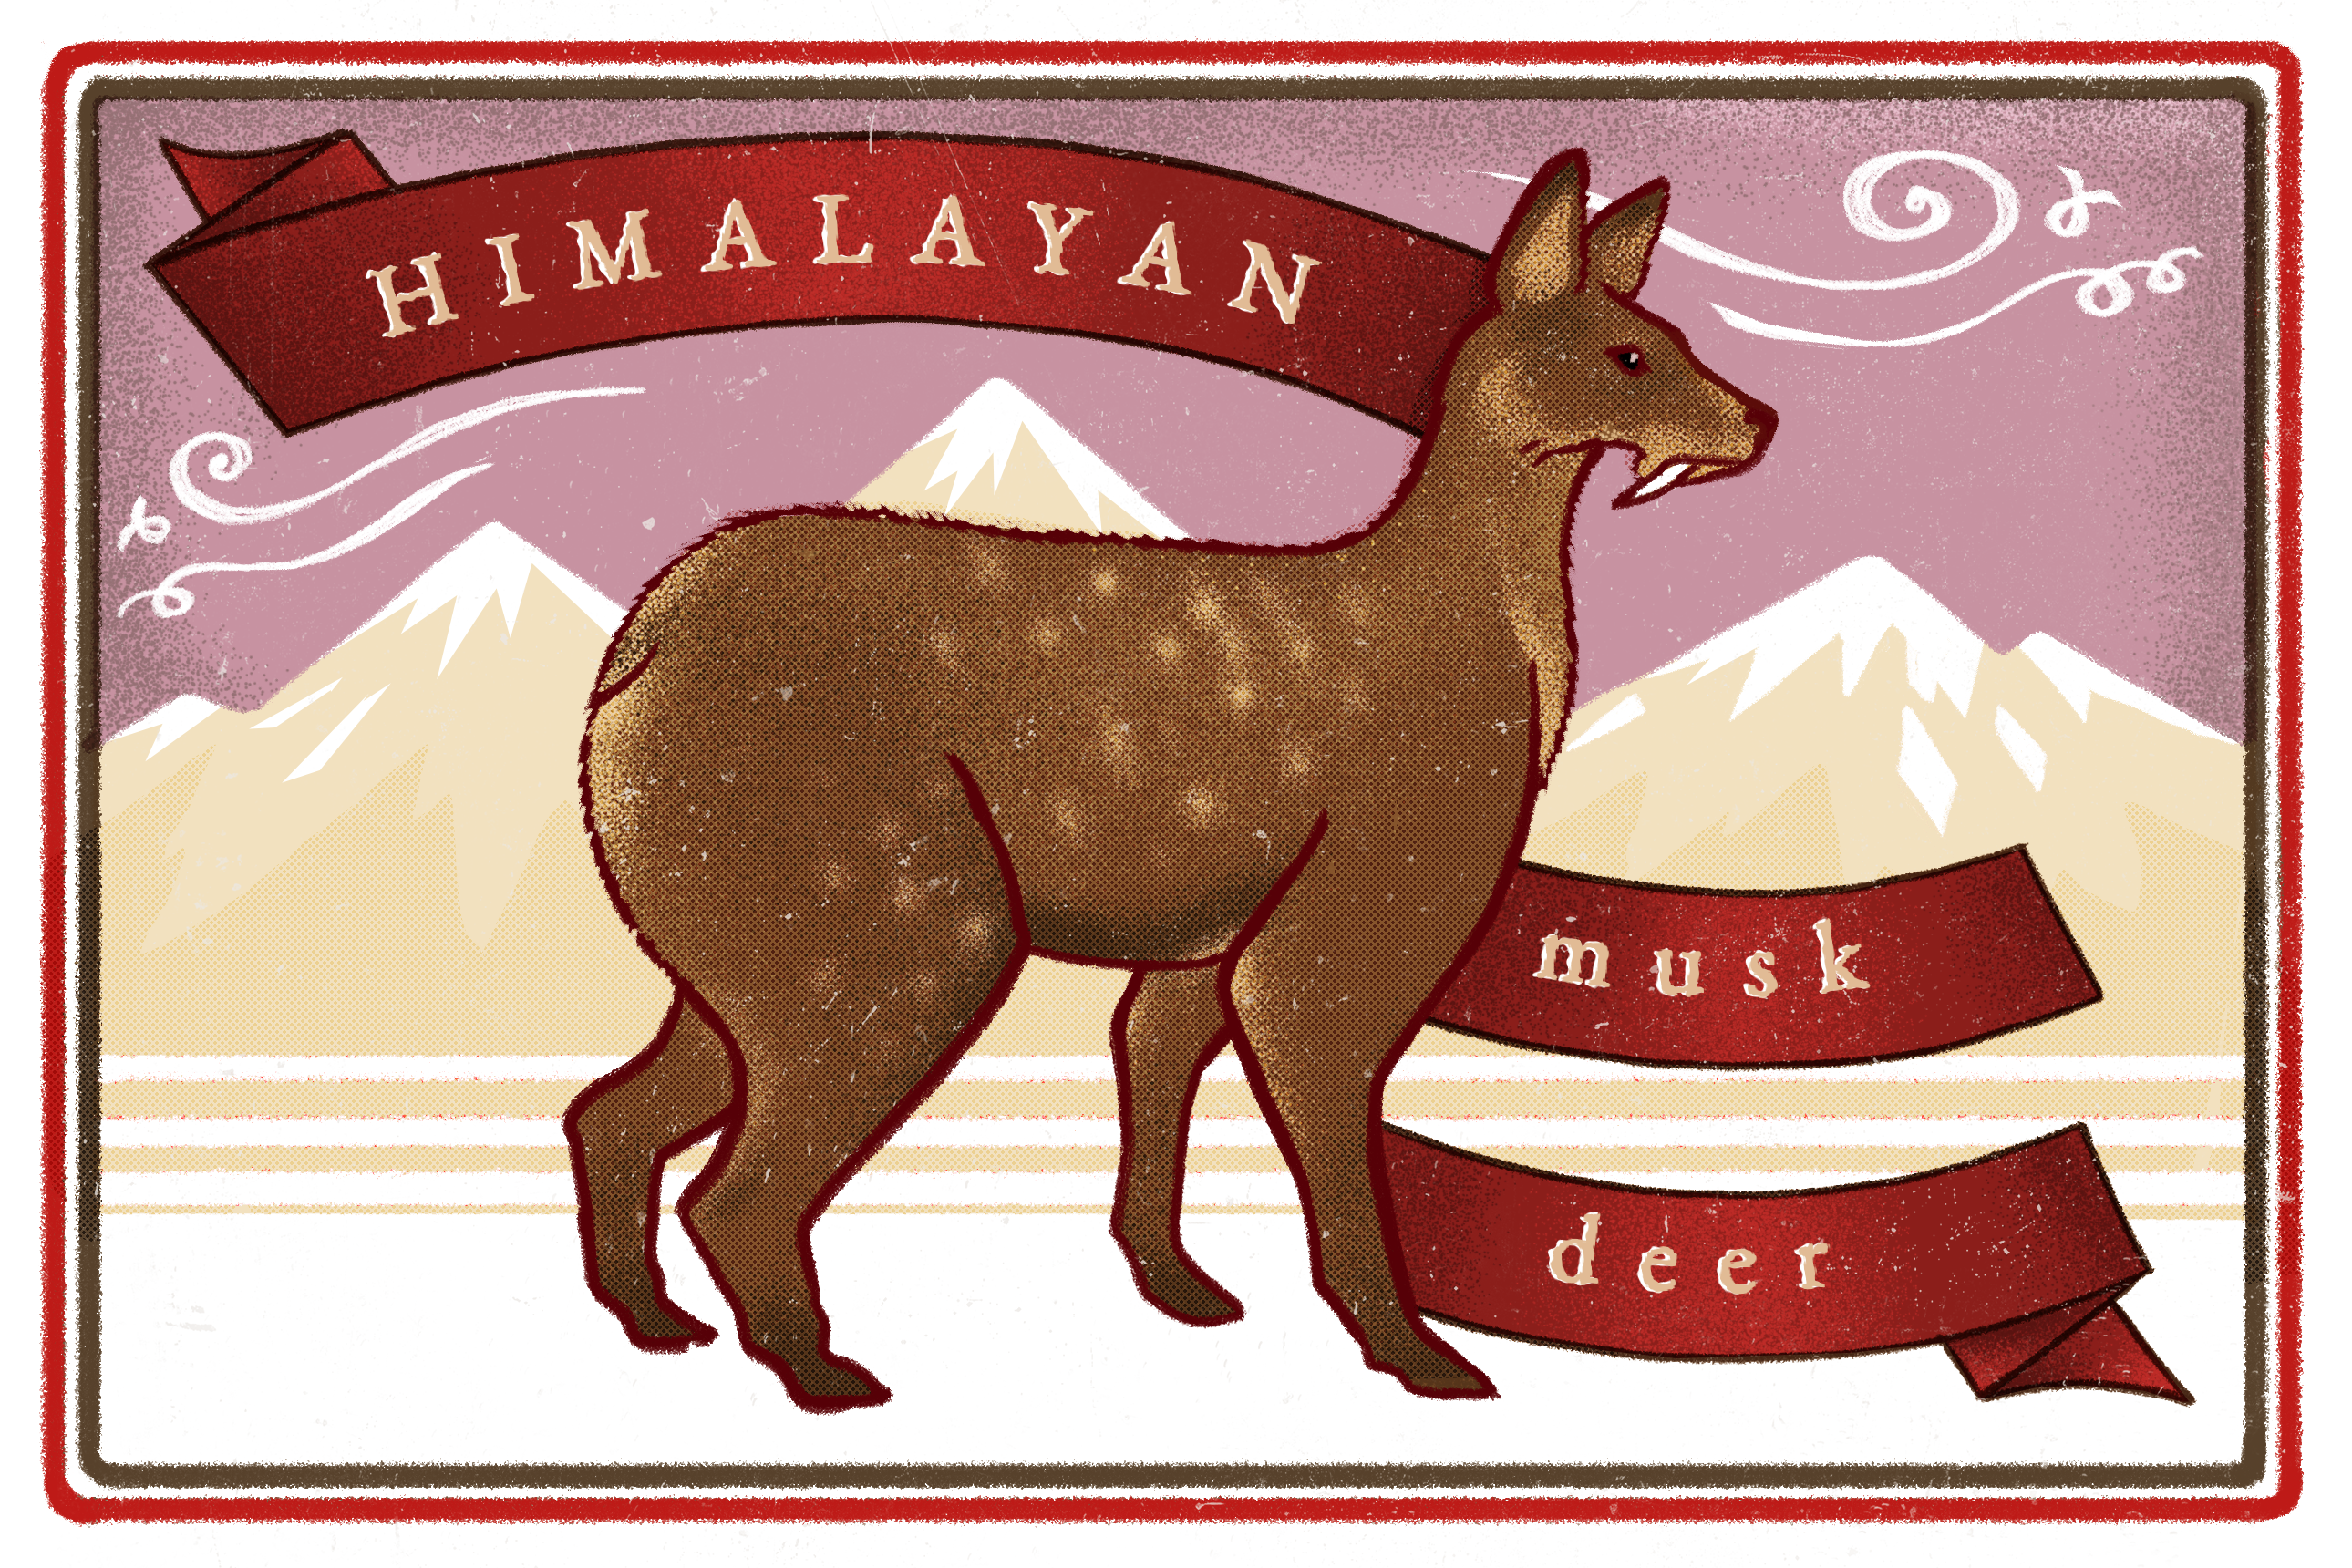 The Himalayan musk deer is an endangered species threatened by habitat loss and hunting for its body parts, including musk glands which are used in perfumery and traditional Chinese medicine (Illustration: Kabini Amin)